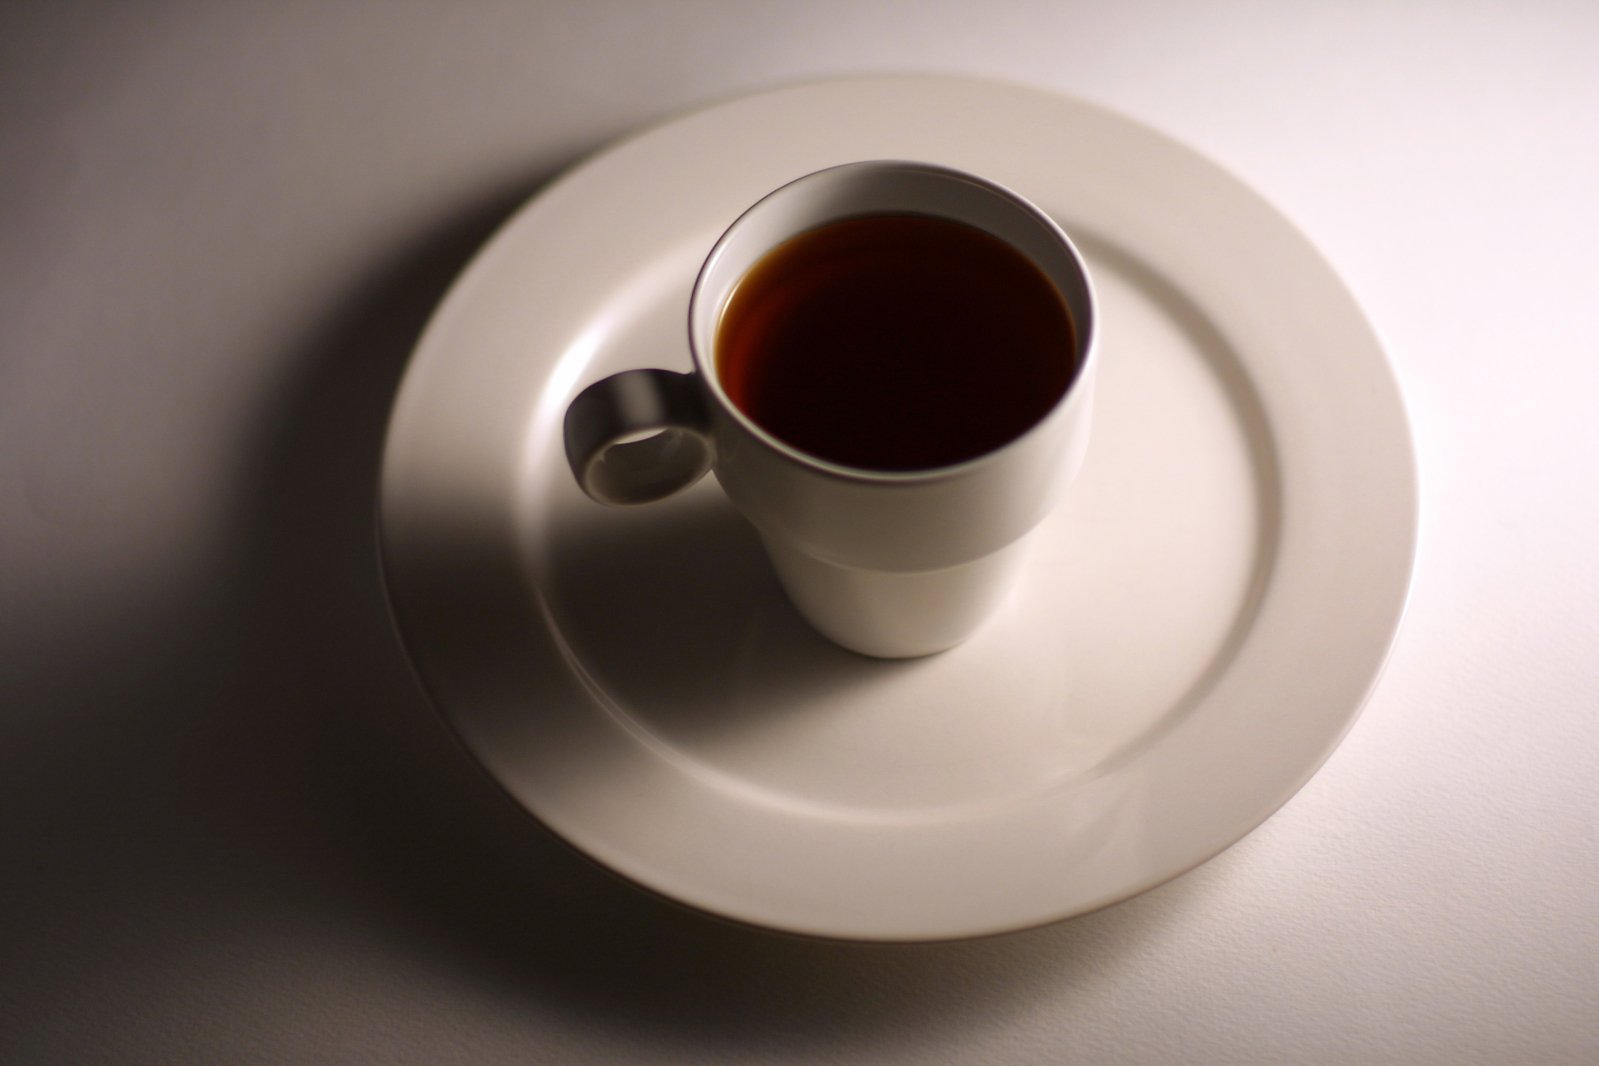 the cup and saucer are sitting on the plate